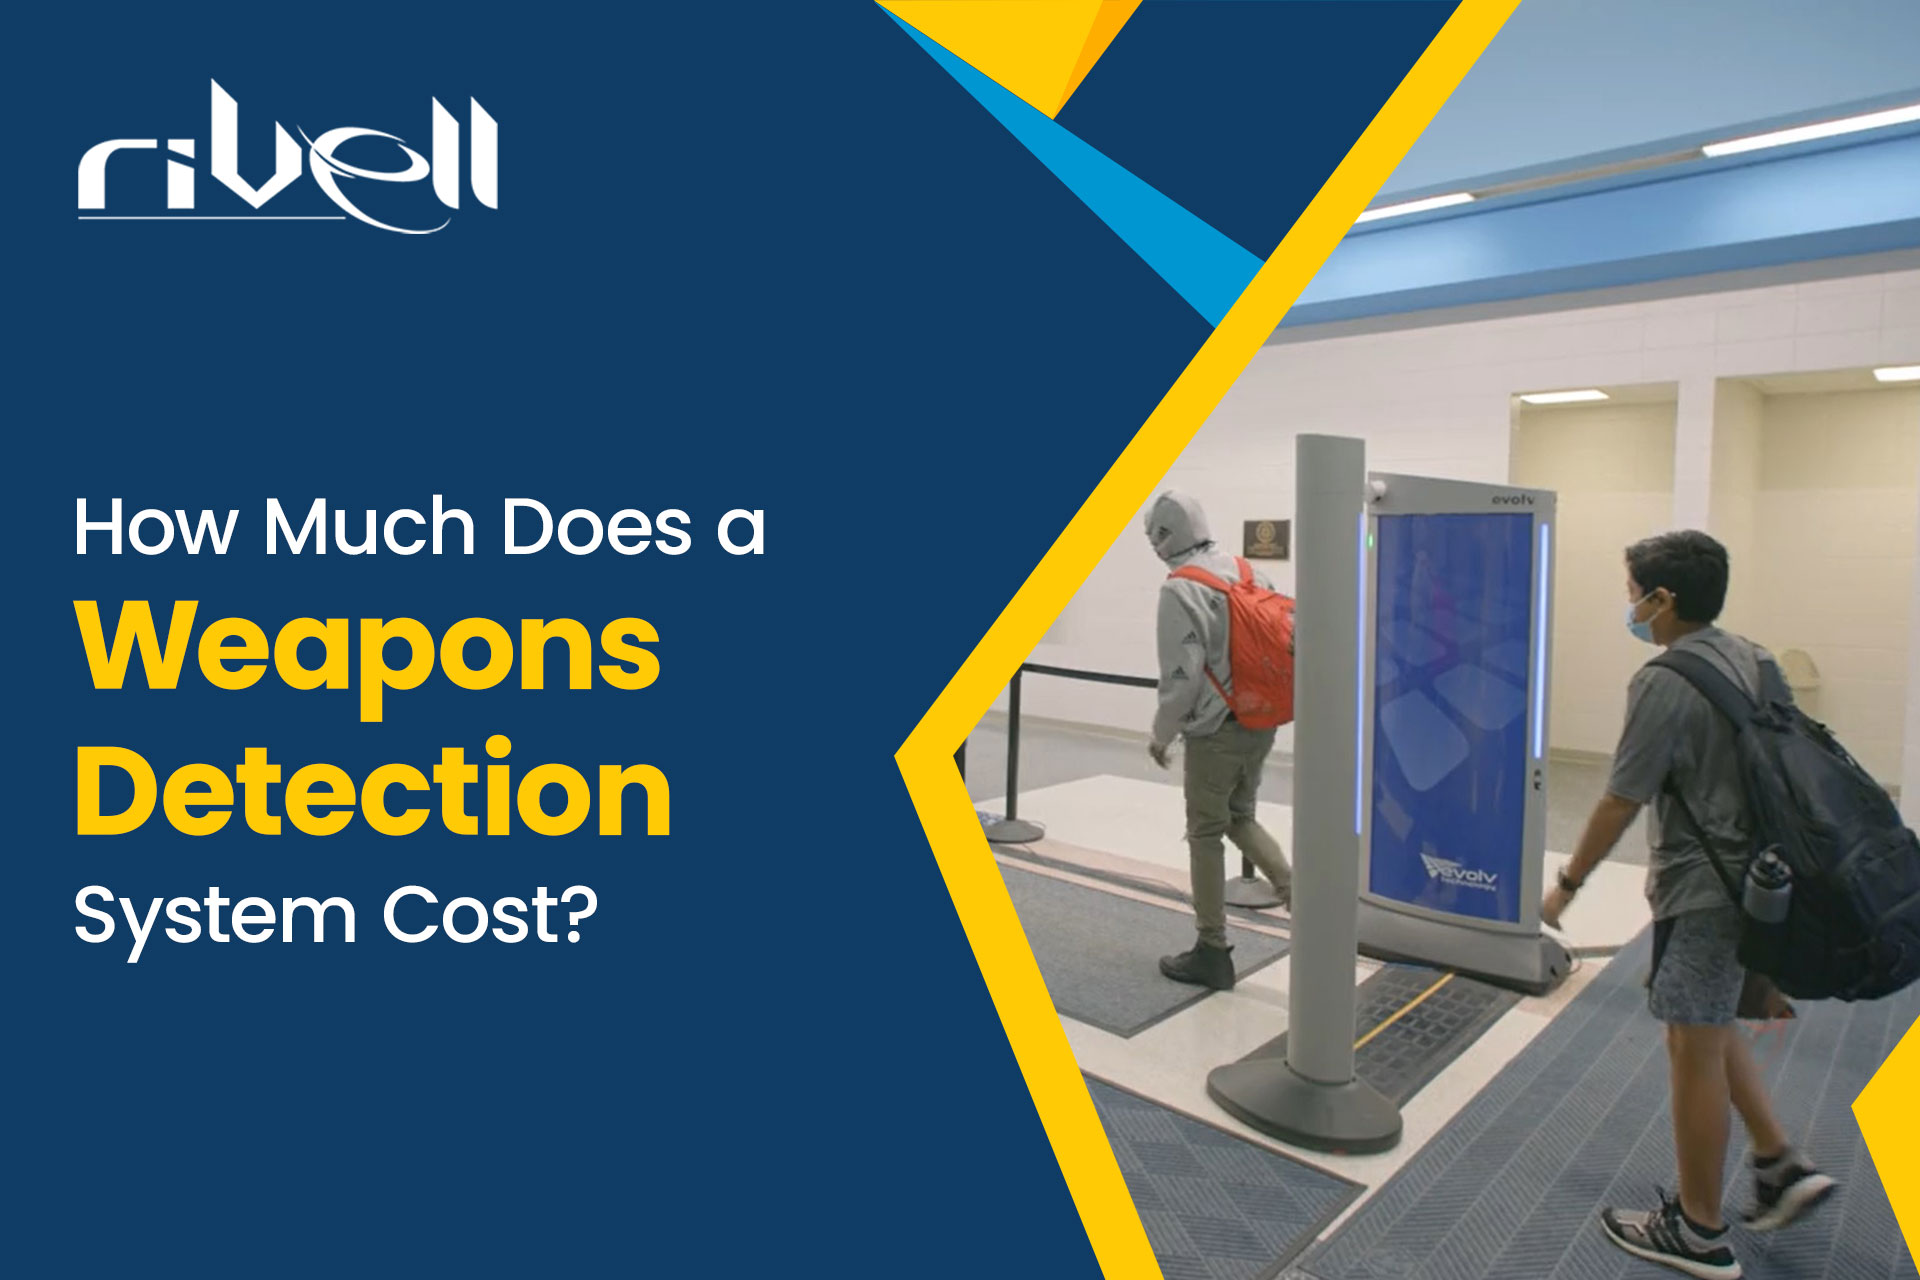 How much does a weapons detection system cost?